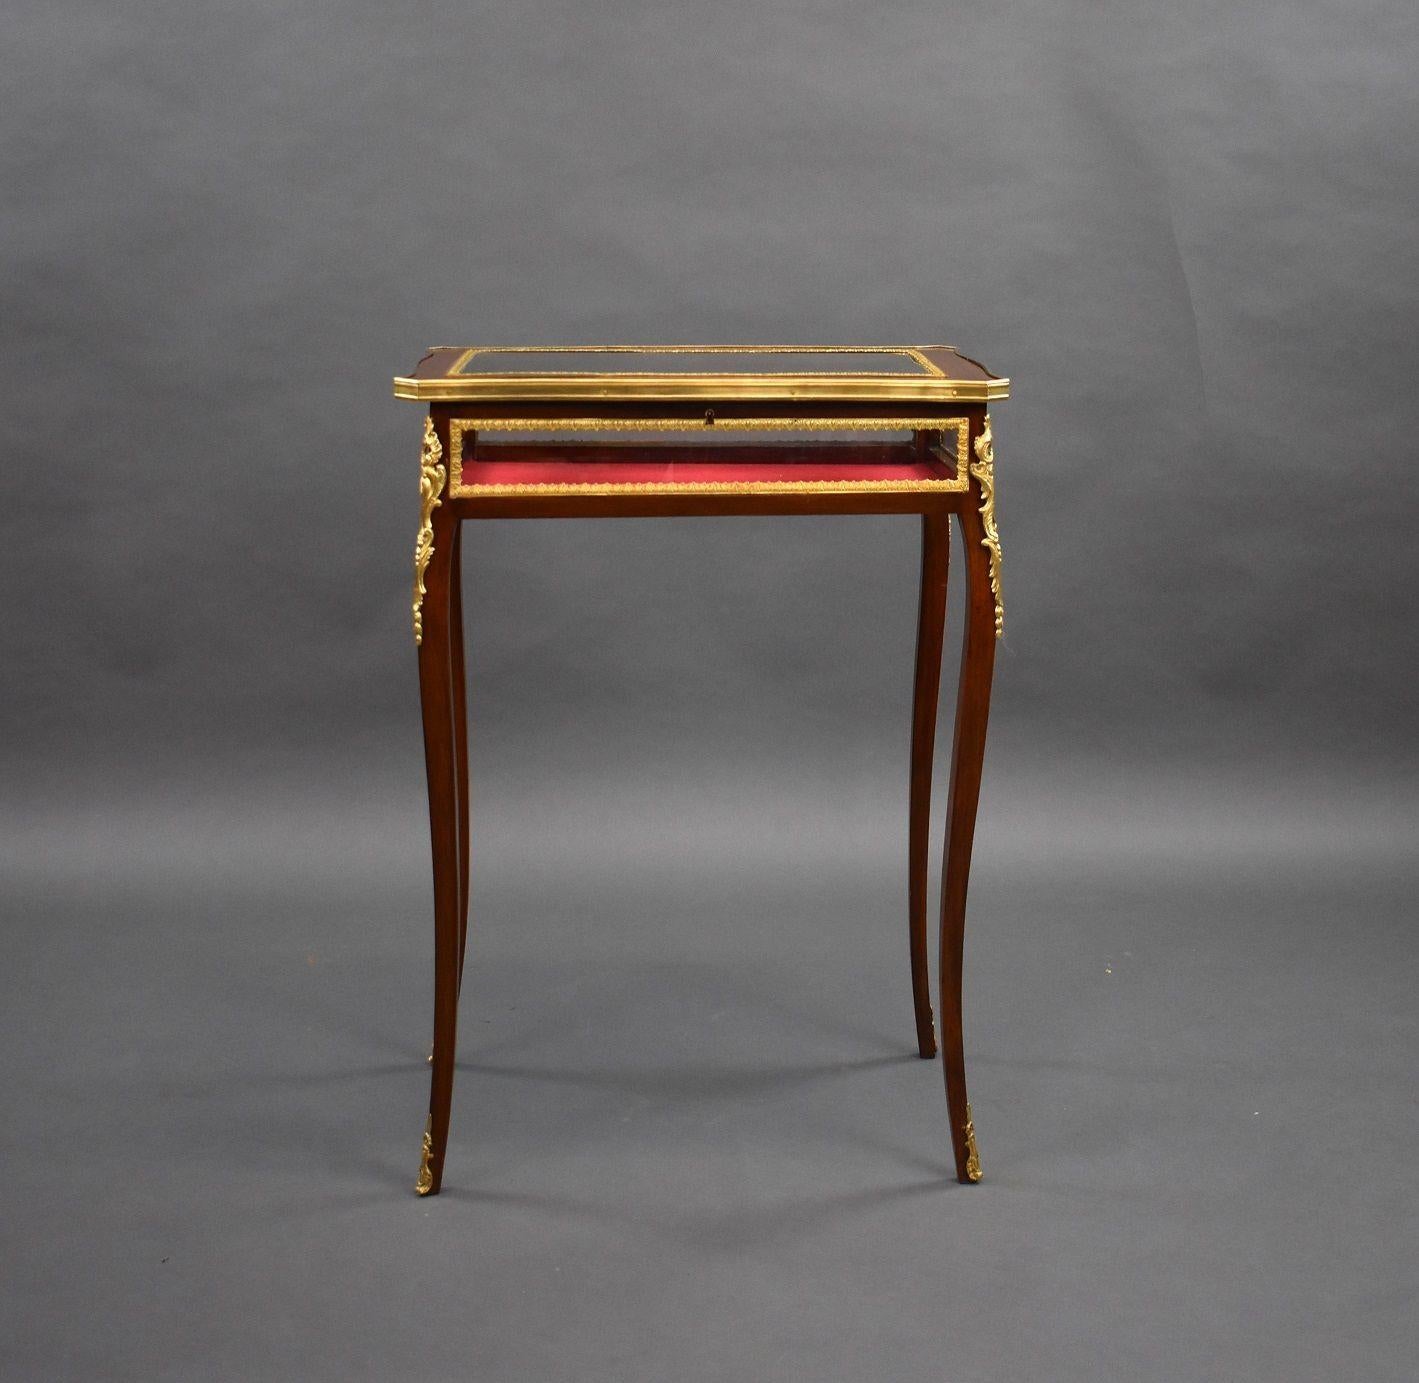 Edwardian French Mahogany Bijouterie/treasure table in good condition. The Table has bevelled glass to the top and glass to the sides with a red velvet lining. The table has ormolu mounts on each corner and each leg.